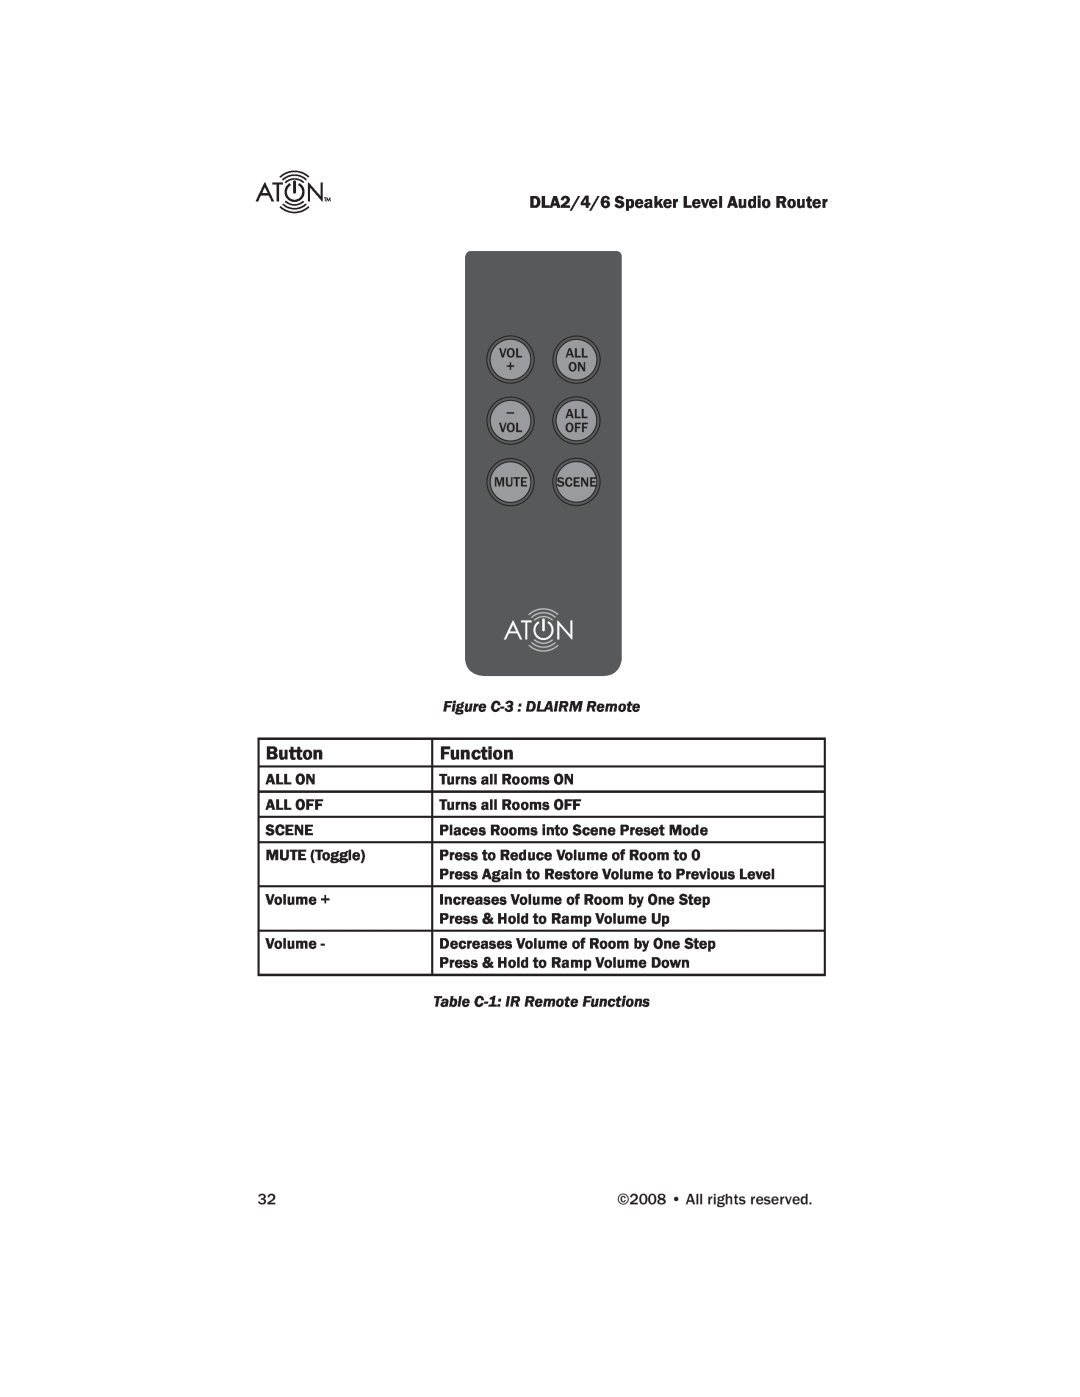 ATON DLA2 Button, Function, Figure C-3 DLAIRM Remote, All On, Turns all Rooms ON, All Off, Turns all Rooms OFF, Scene 